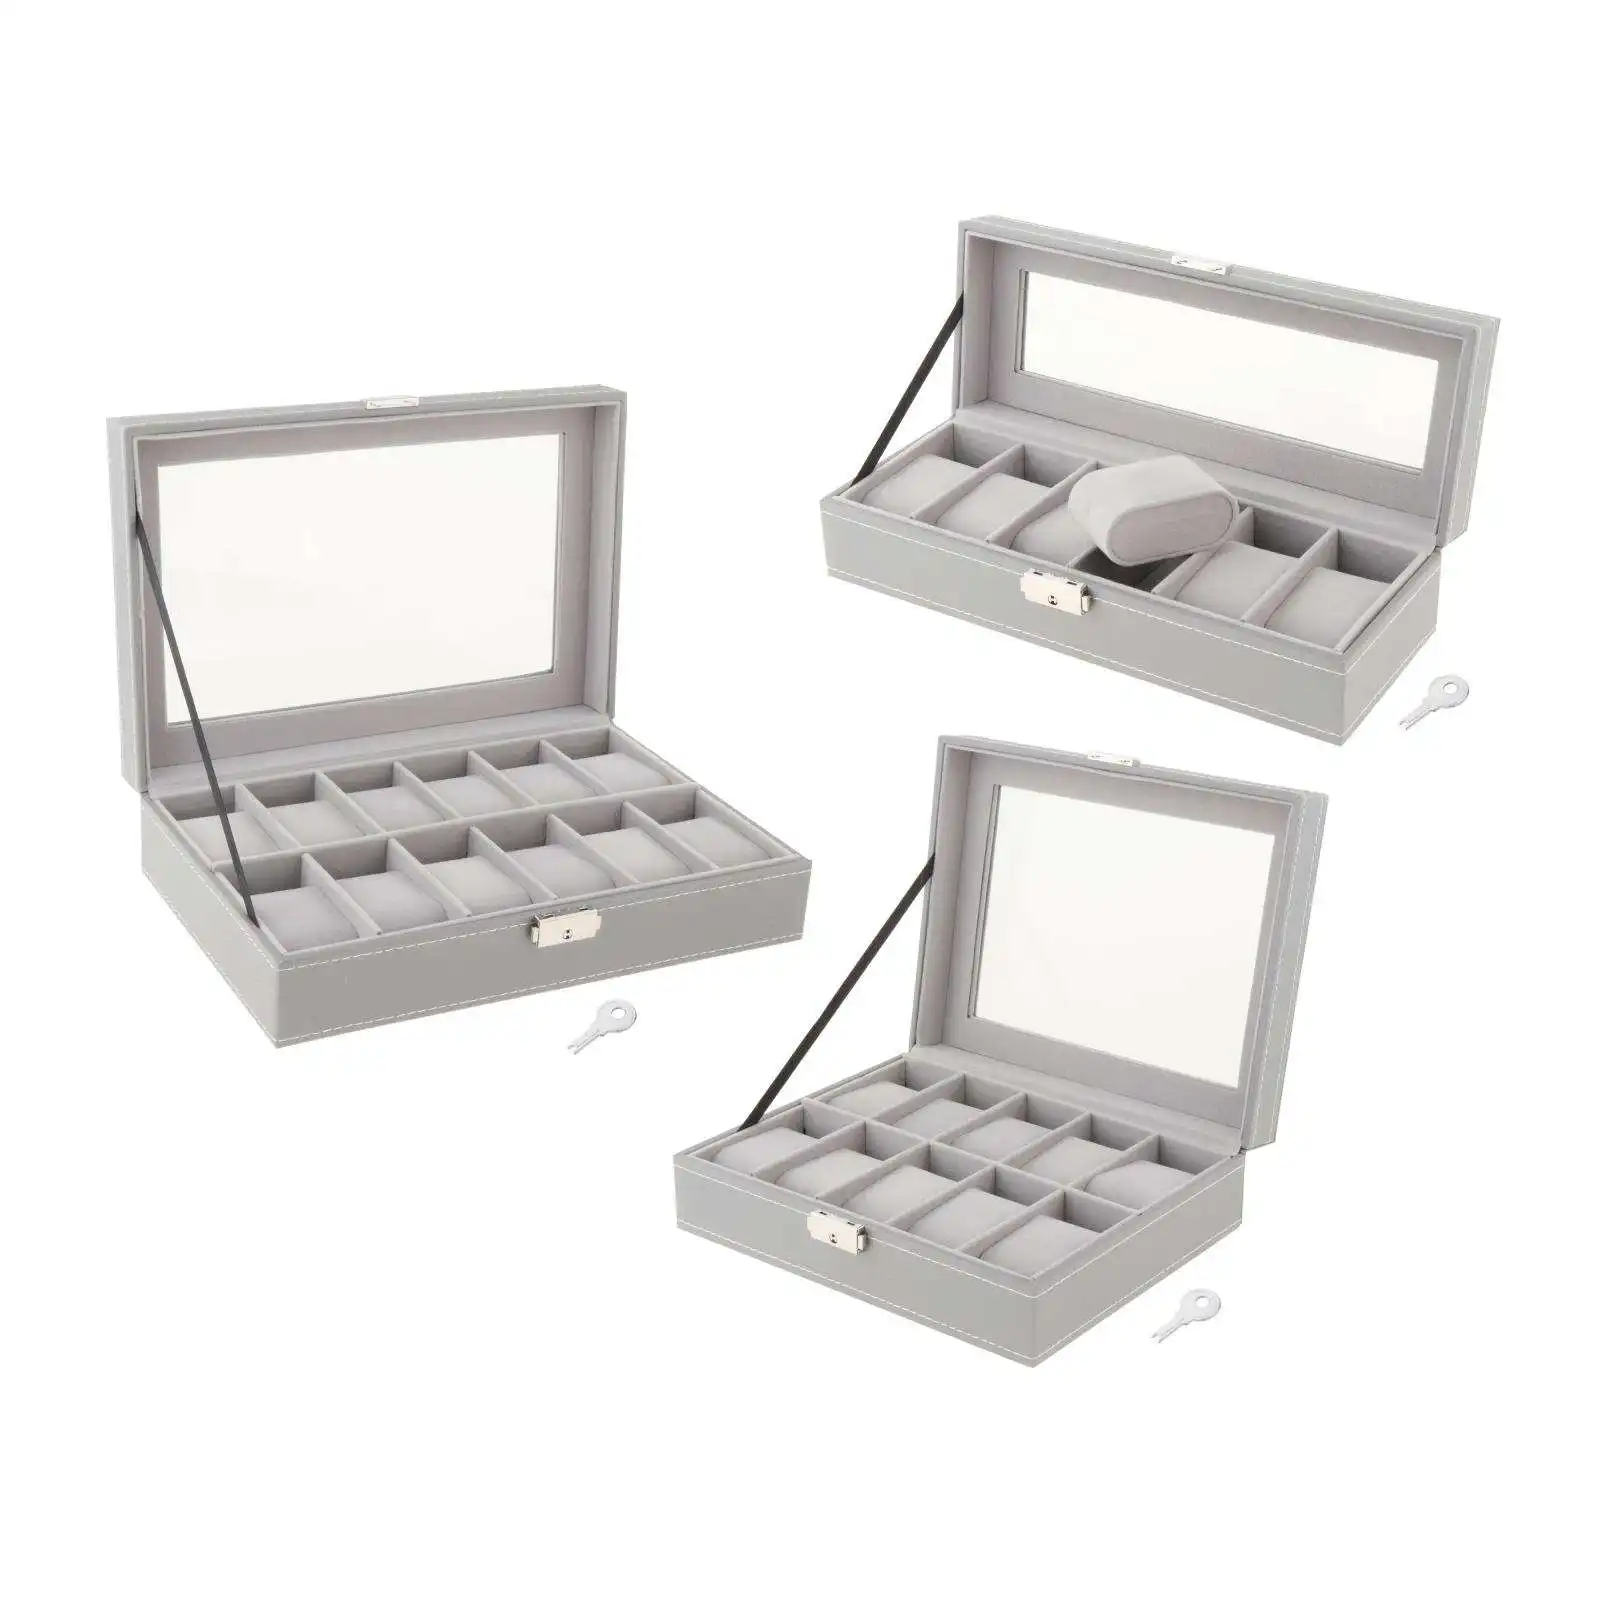 6/10/12 Watch Box PU Leather Gray Watch Case Boxes Storage Holder Organizer Jewelry Boxes Display Best Gift